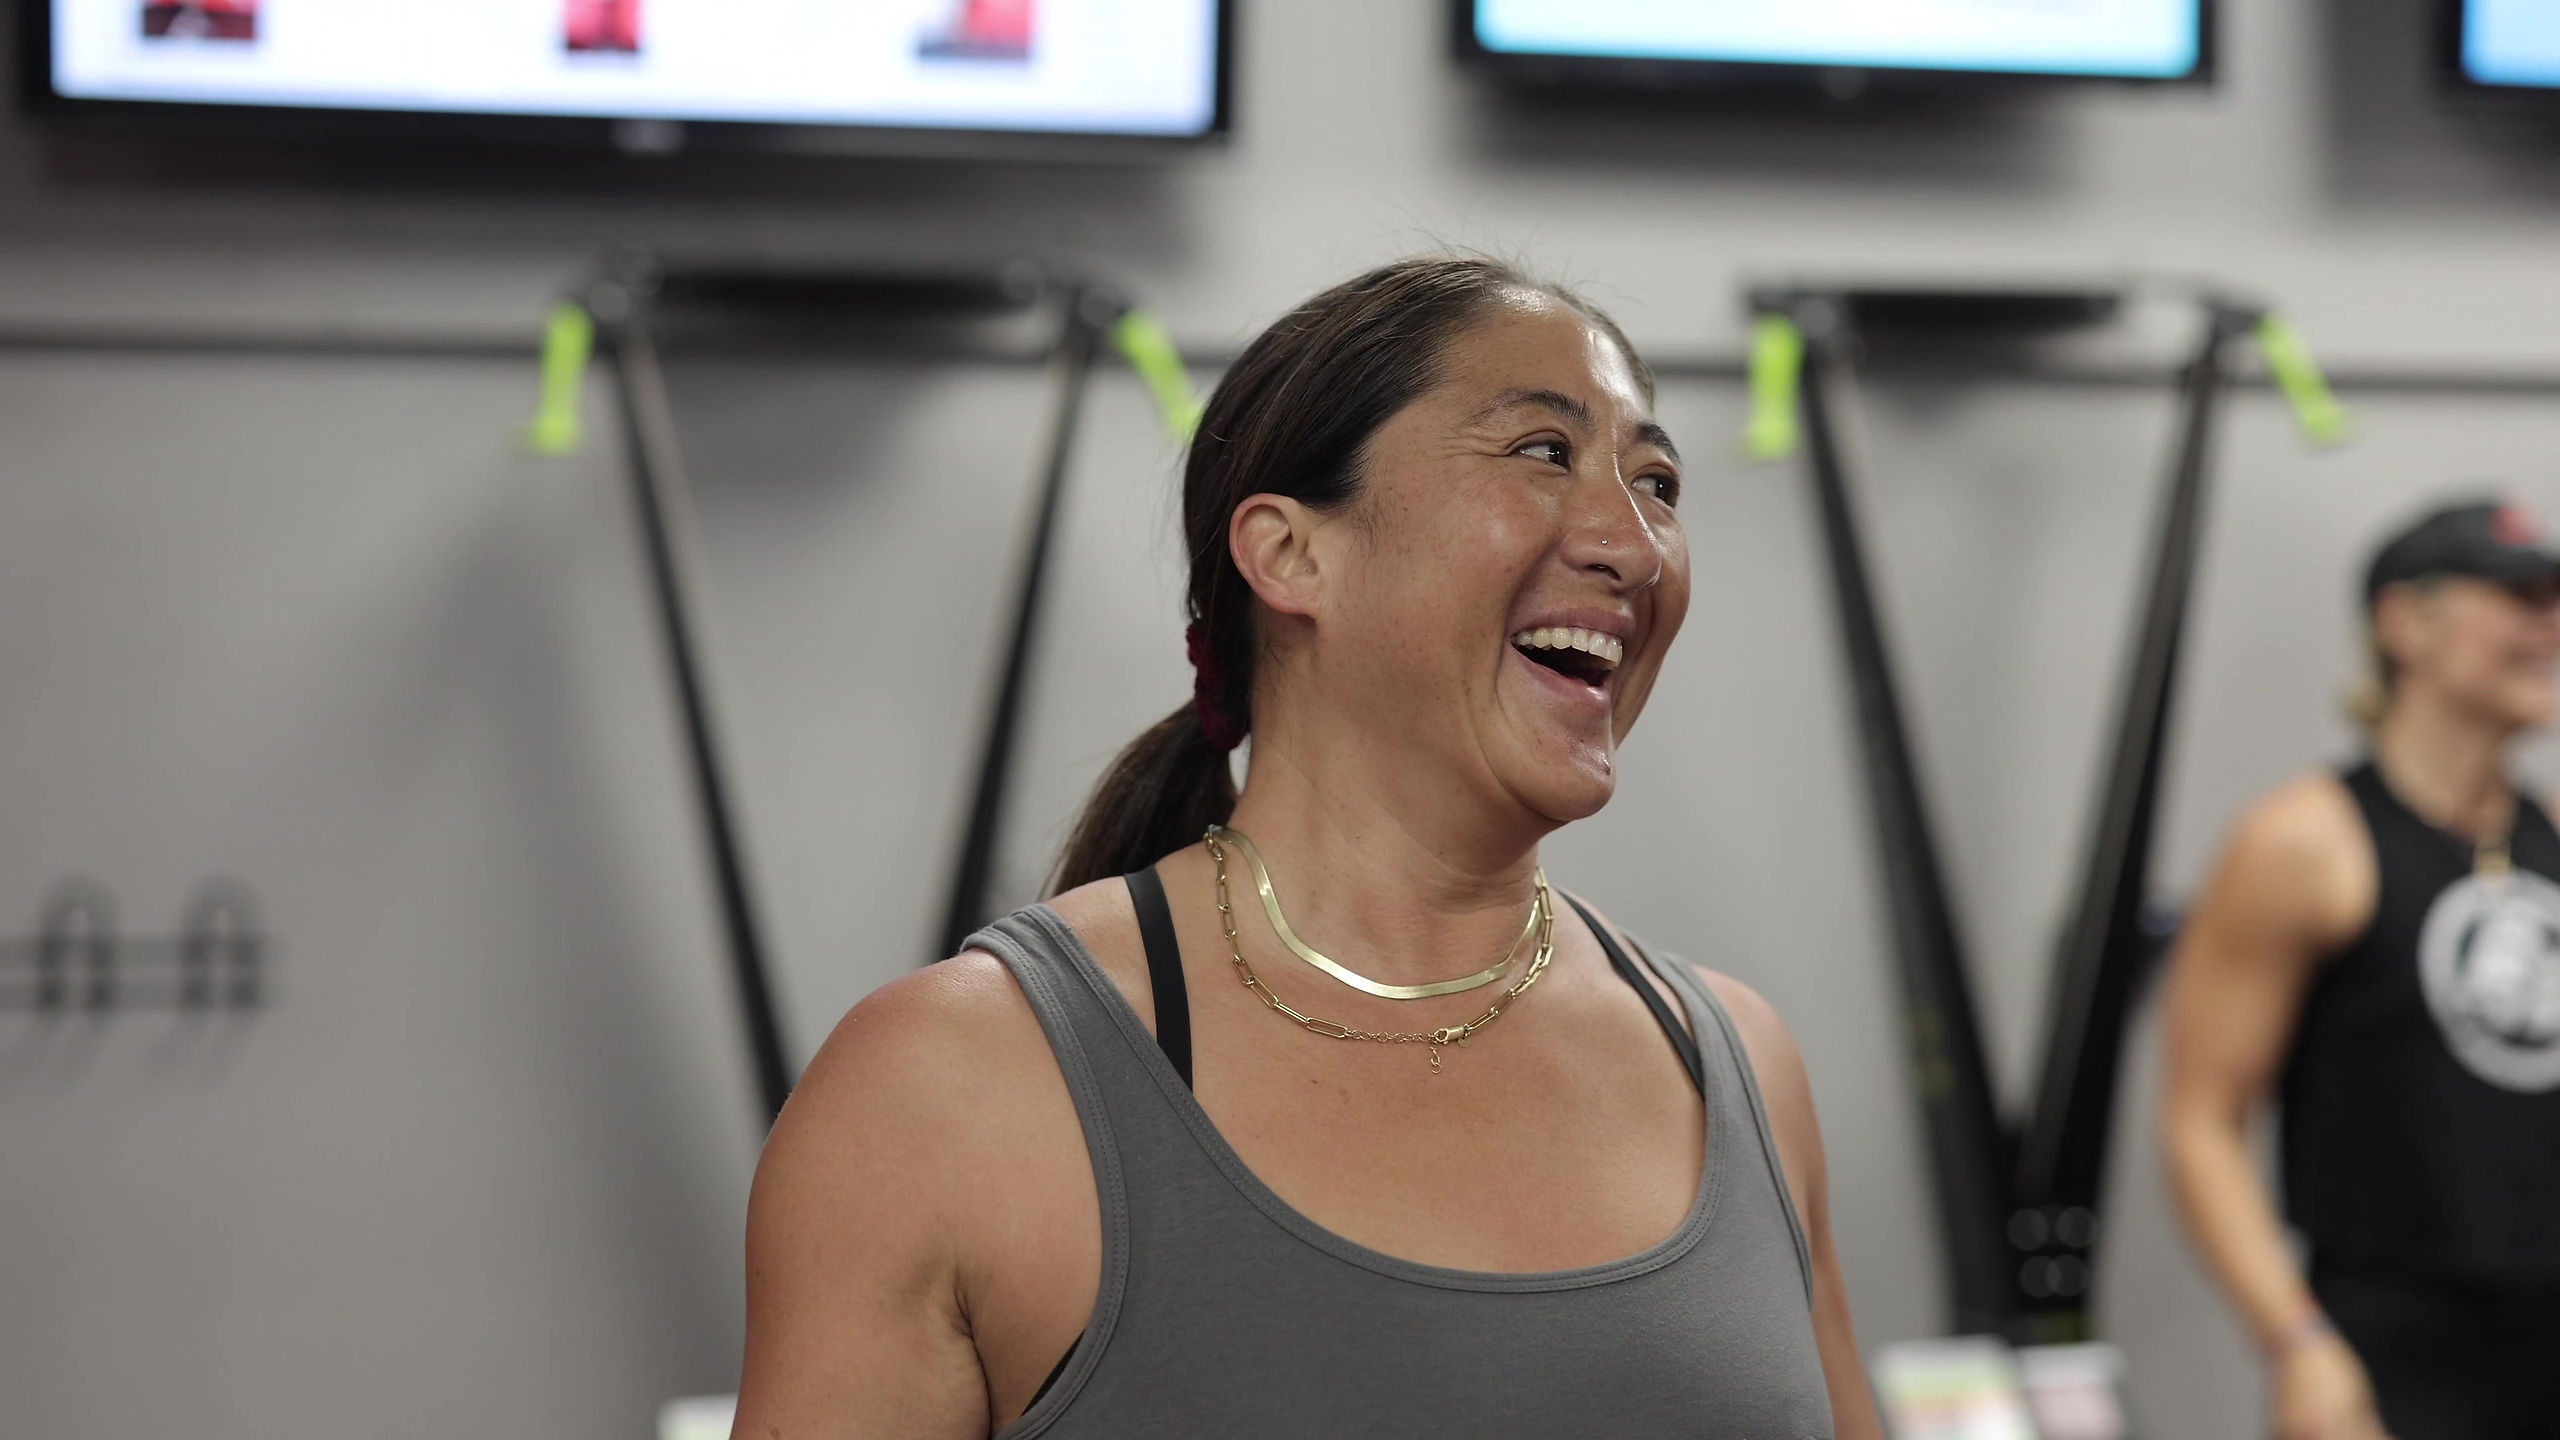 New to RiseUp Fitness? Hear what our members have to say about our program!